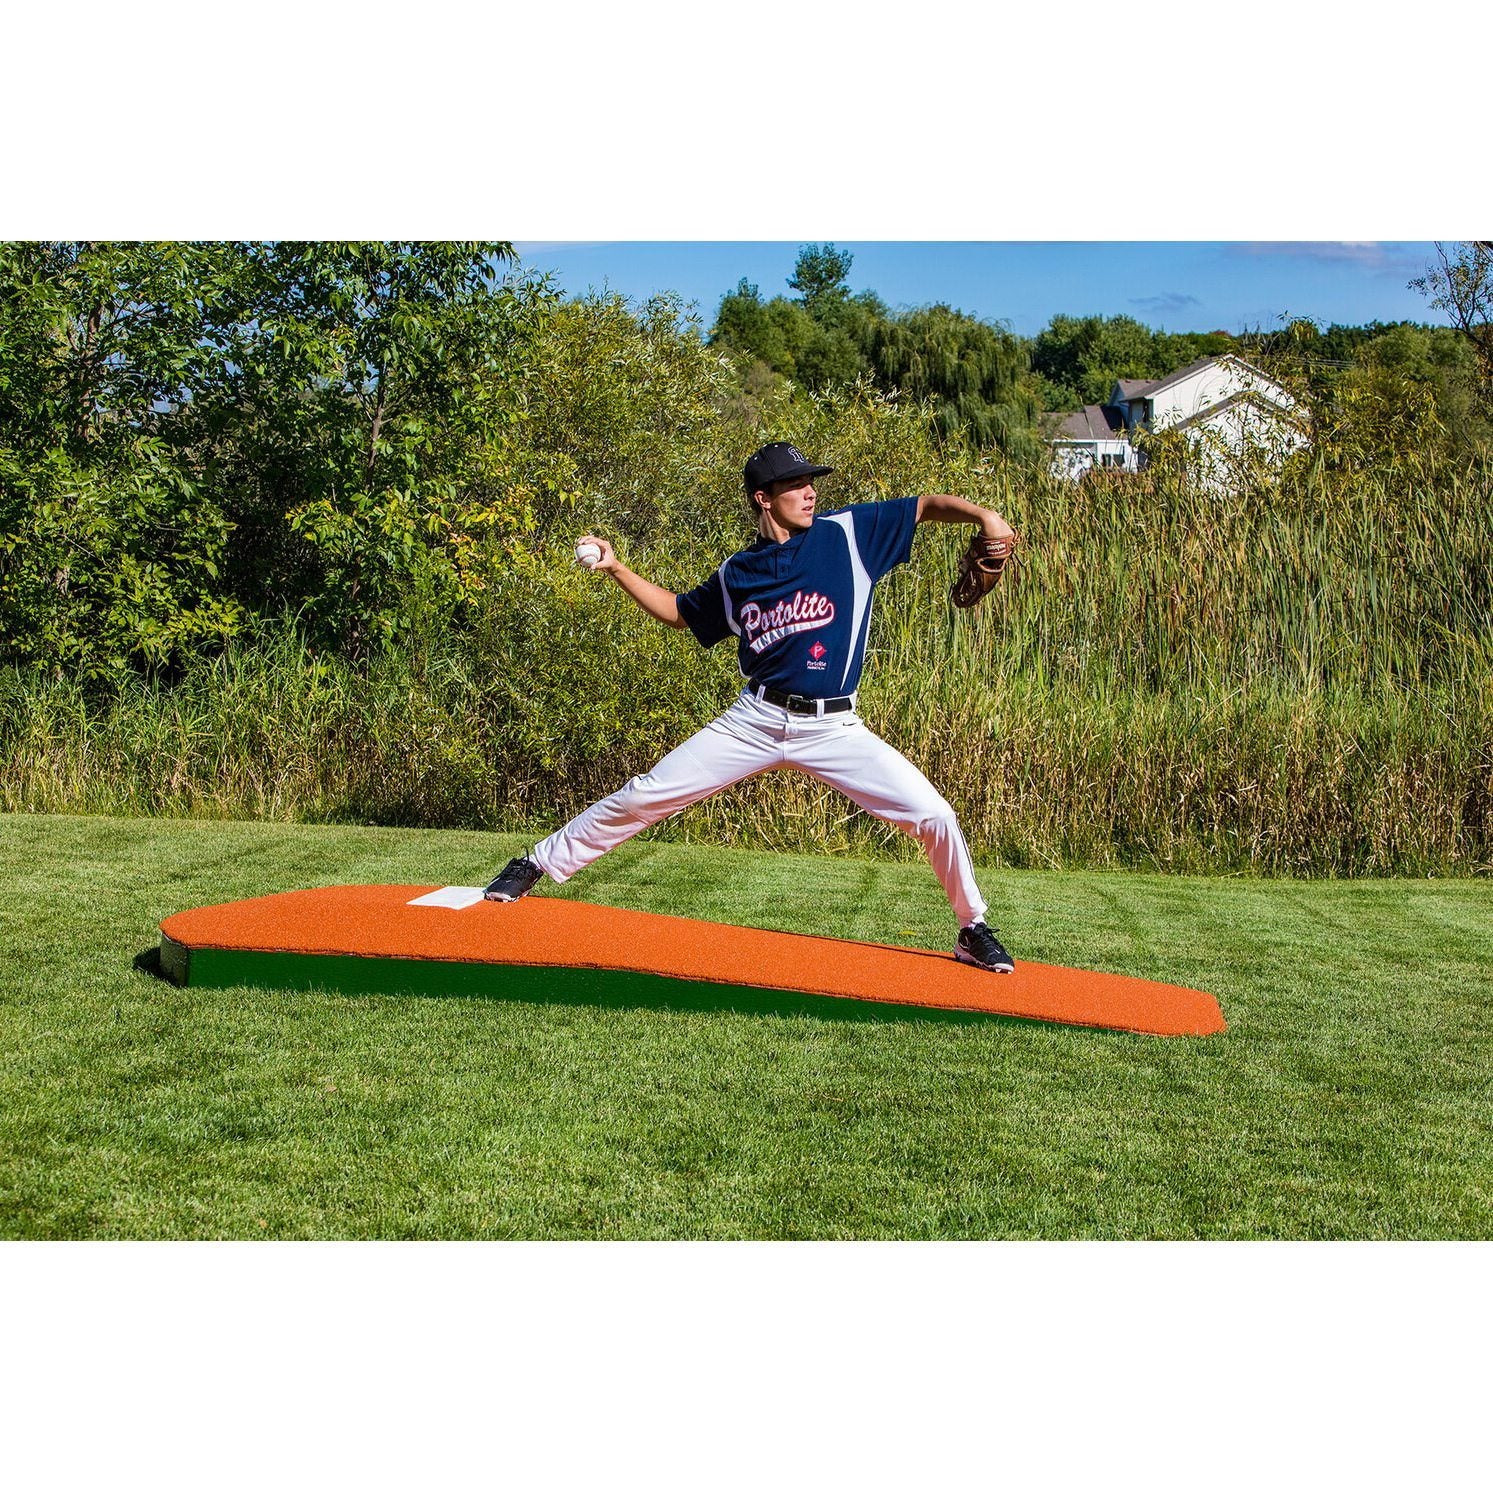 Portolite 10" Portable Practice Pitching Mound clay side view pitching on mound